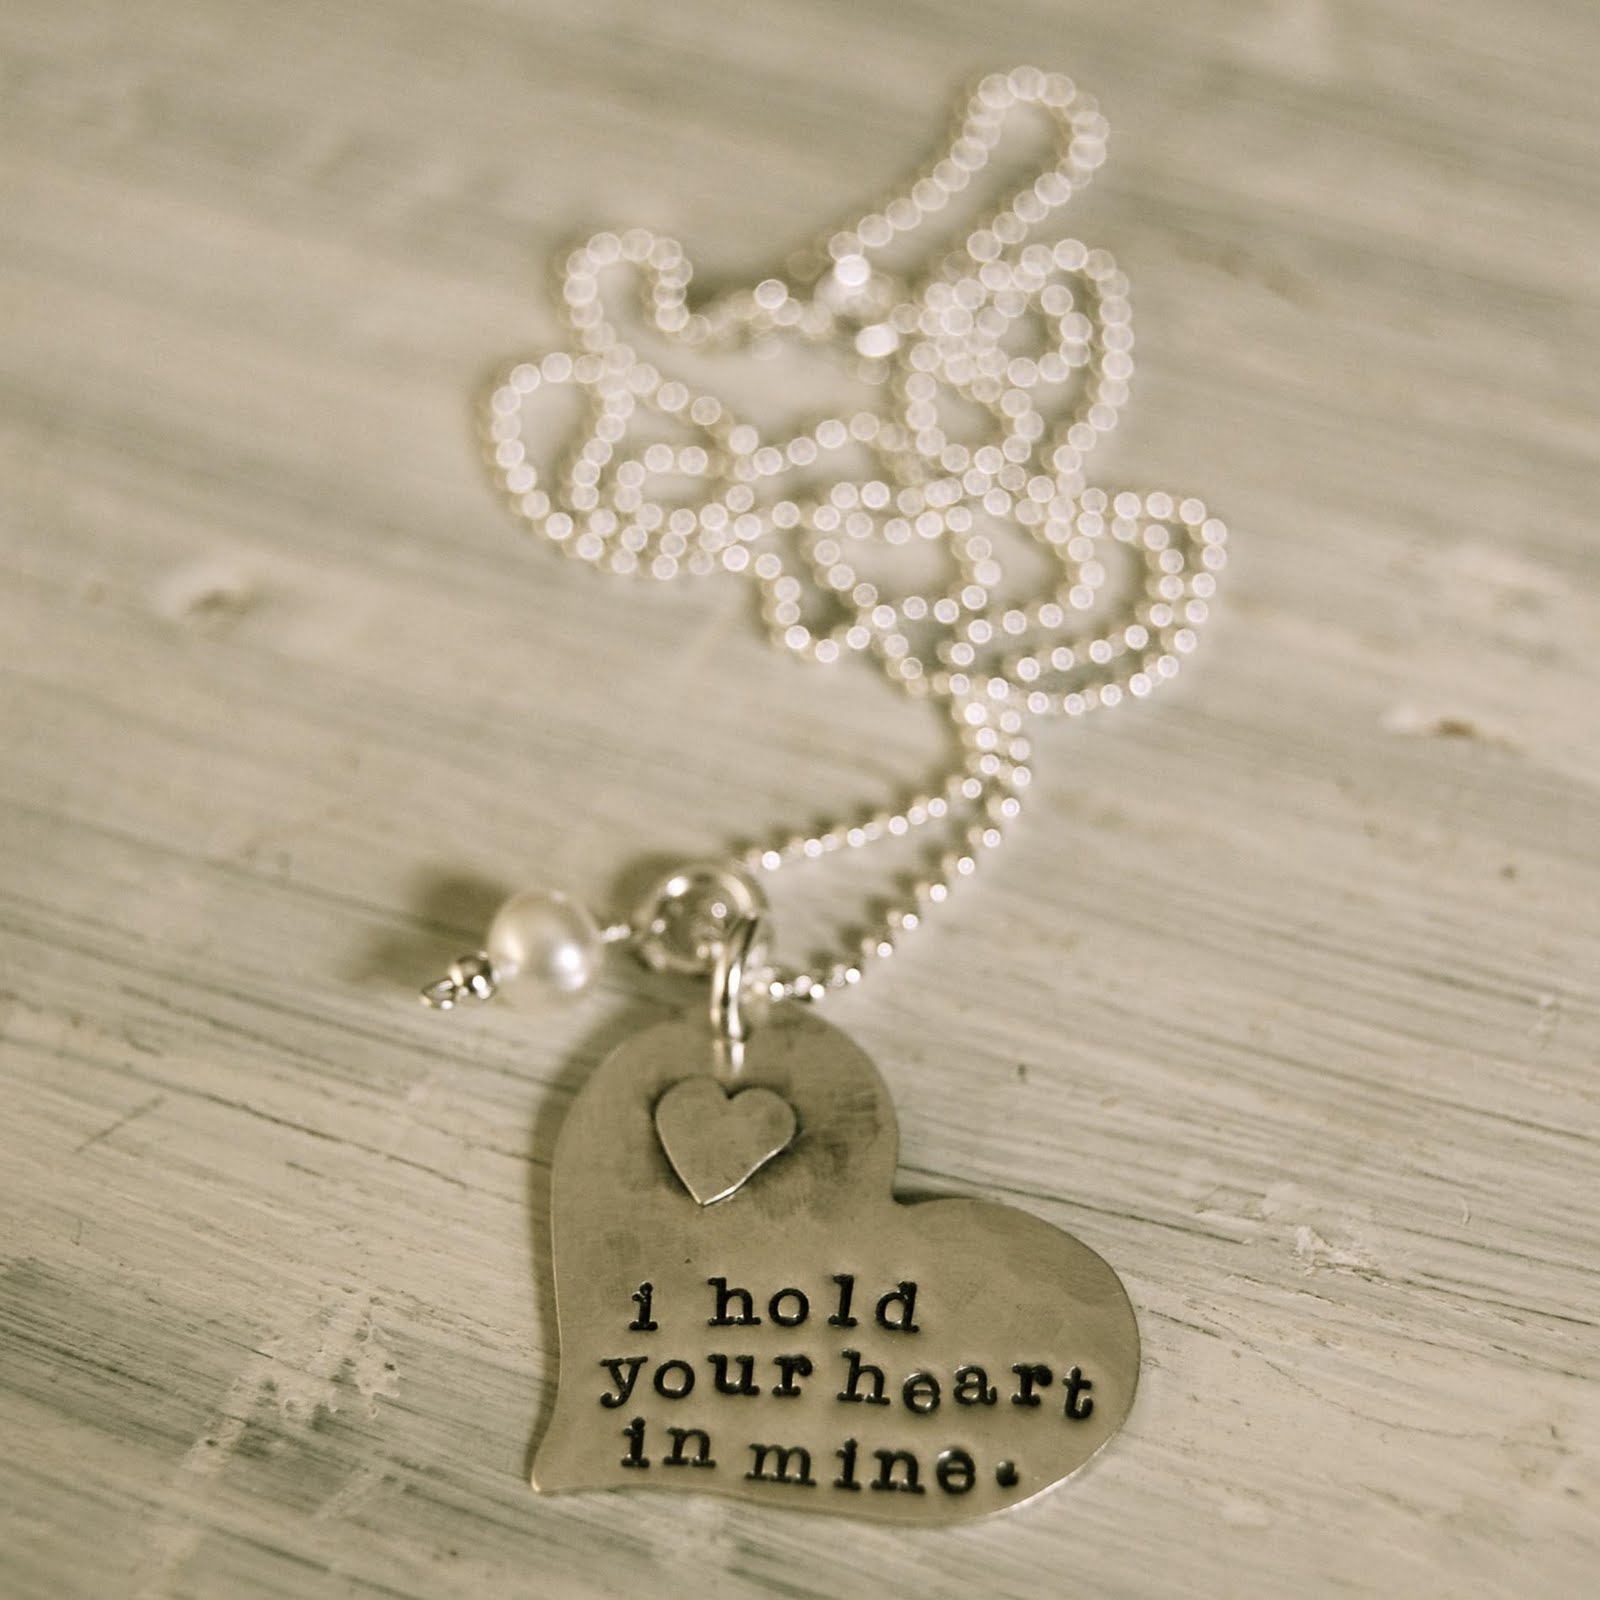 This heart of mine. I carry your Heart with me браслет. Heart Necklace. Hold your Heart. Your Hearts are mine душа моя.